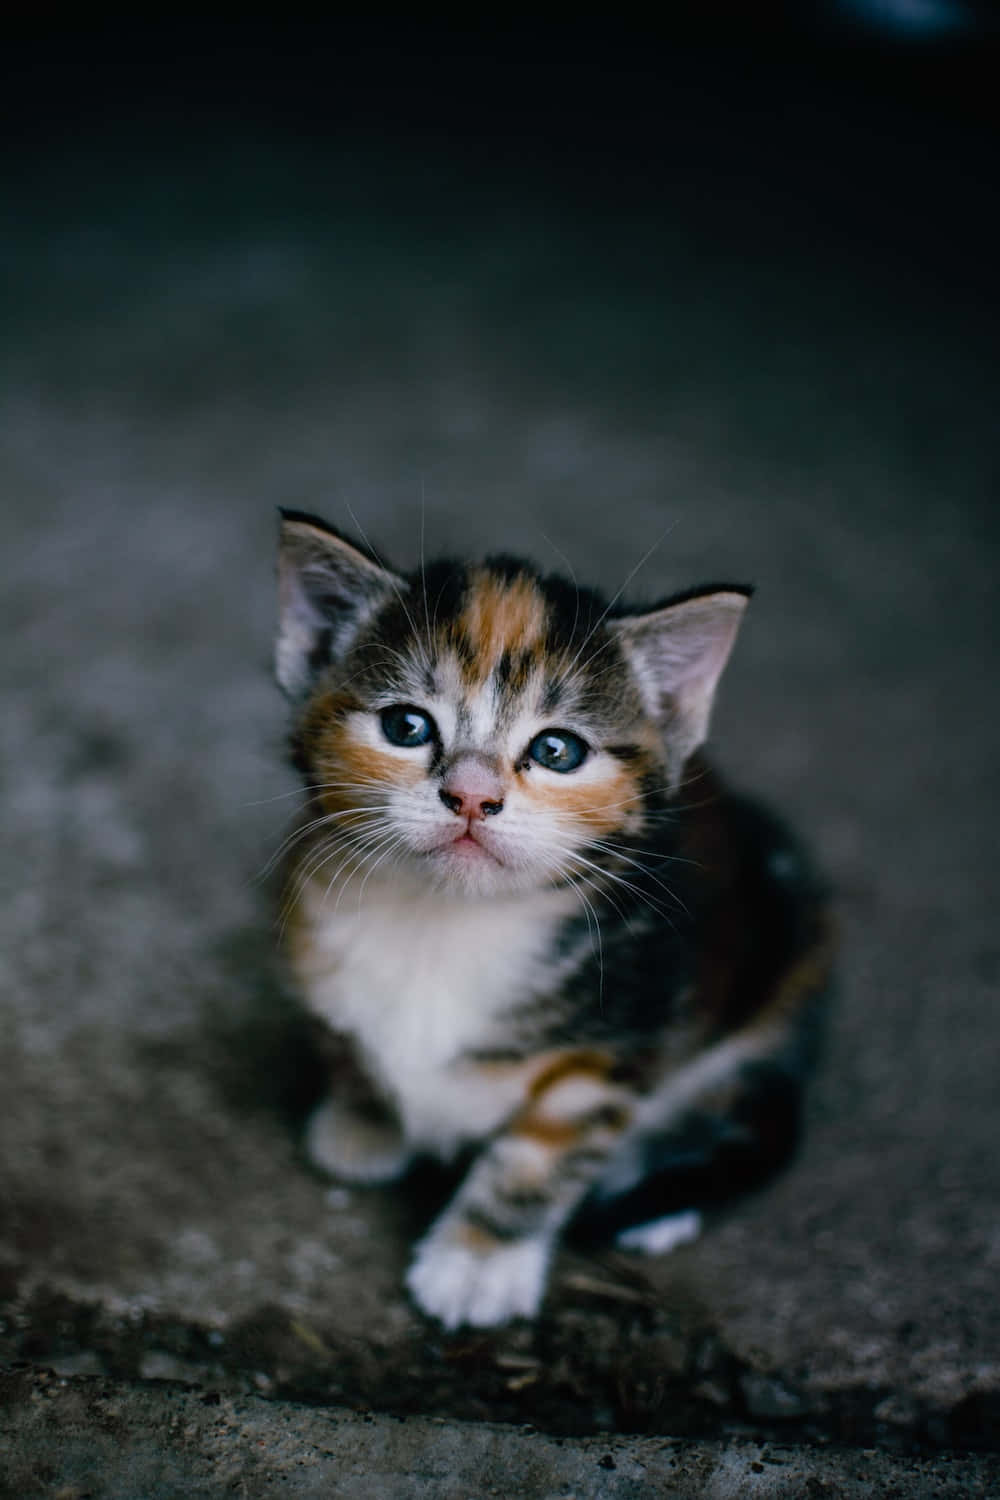 Adorable Baby Cat Looks Ready for a Cuddle